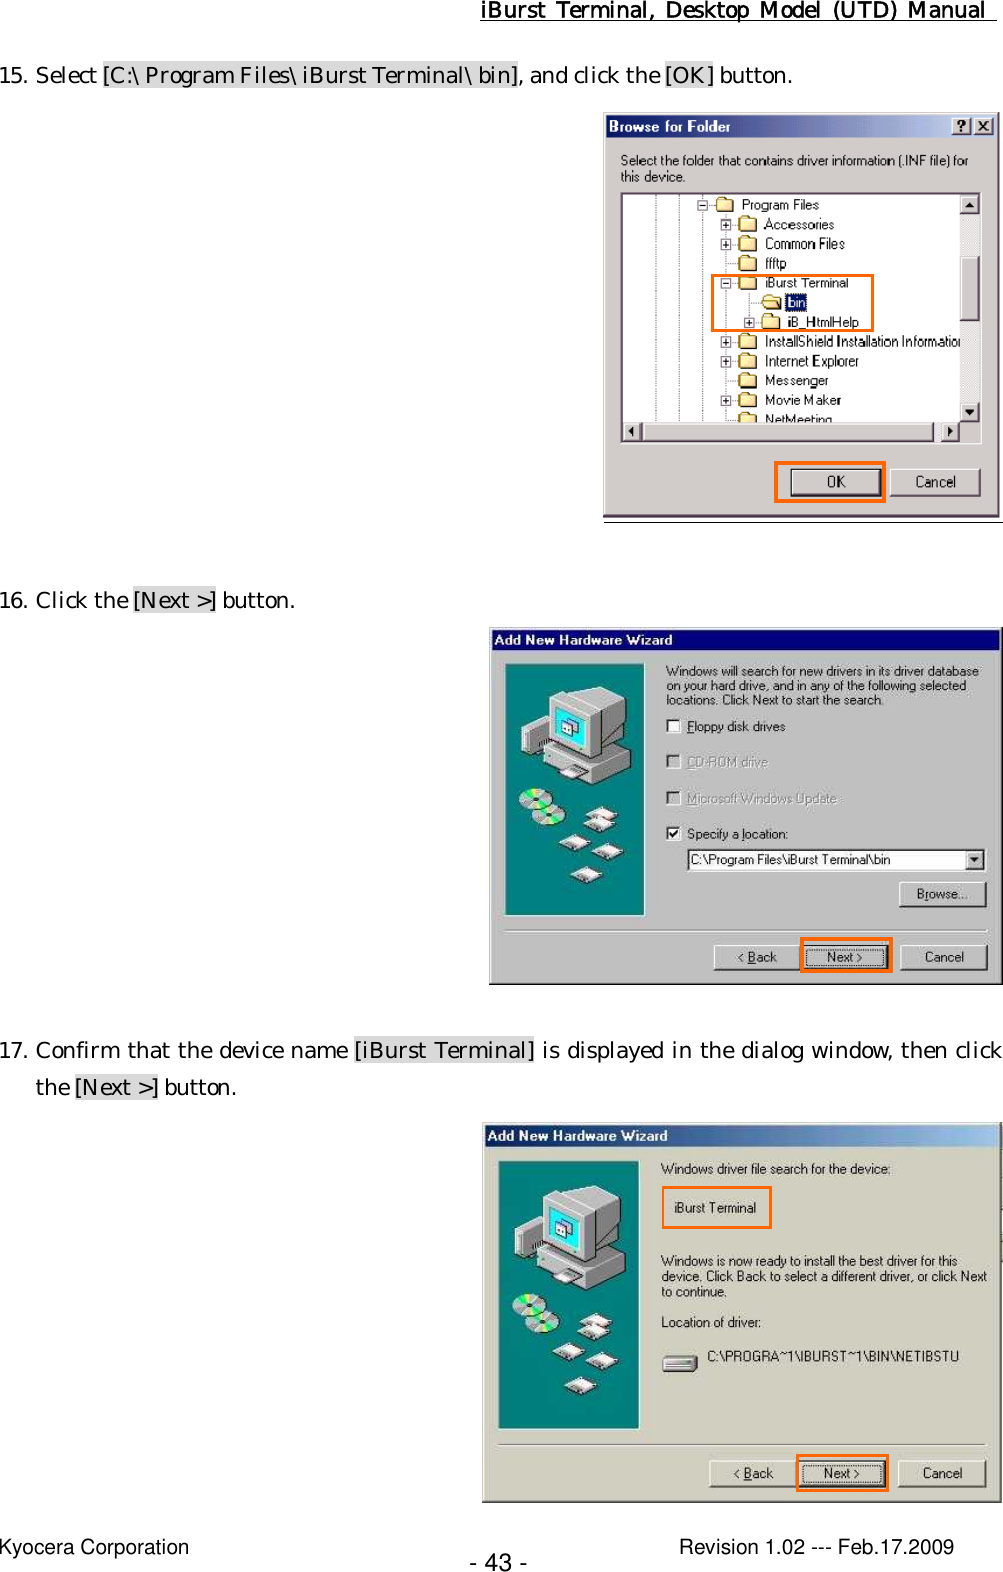 iBurst  Terminal, Desktop  Model  (UTD)  Manual    Kyocera Corporation                                                                                              Revision 1.02 --- Feb.17.2009 - 43 - 15. Select [C:\Program Files\iBurst Terminal\bin], and click the [OK] button.   16. Click the [Next &gt;] button.   17. Confirm that the device name [iBurst Terminal] is displayed in the dialog window, then click the [Next &gt;] button.  